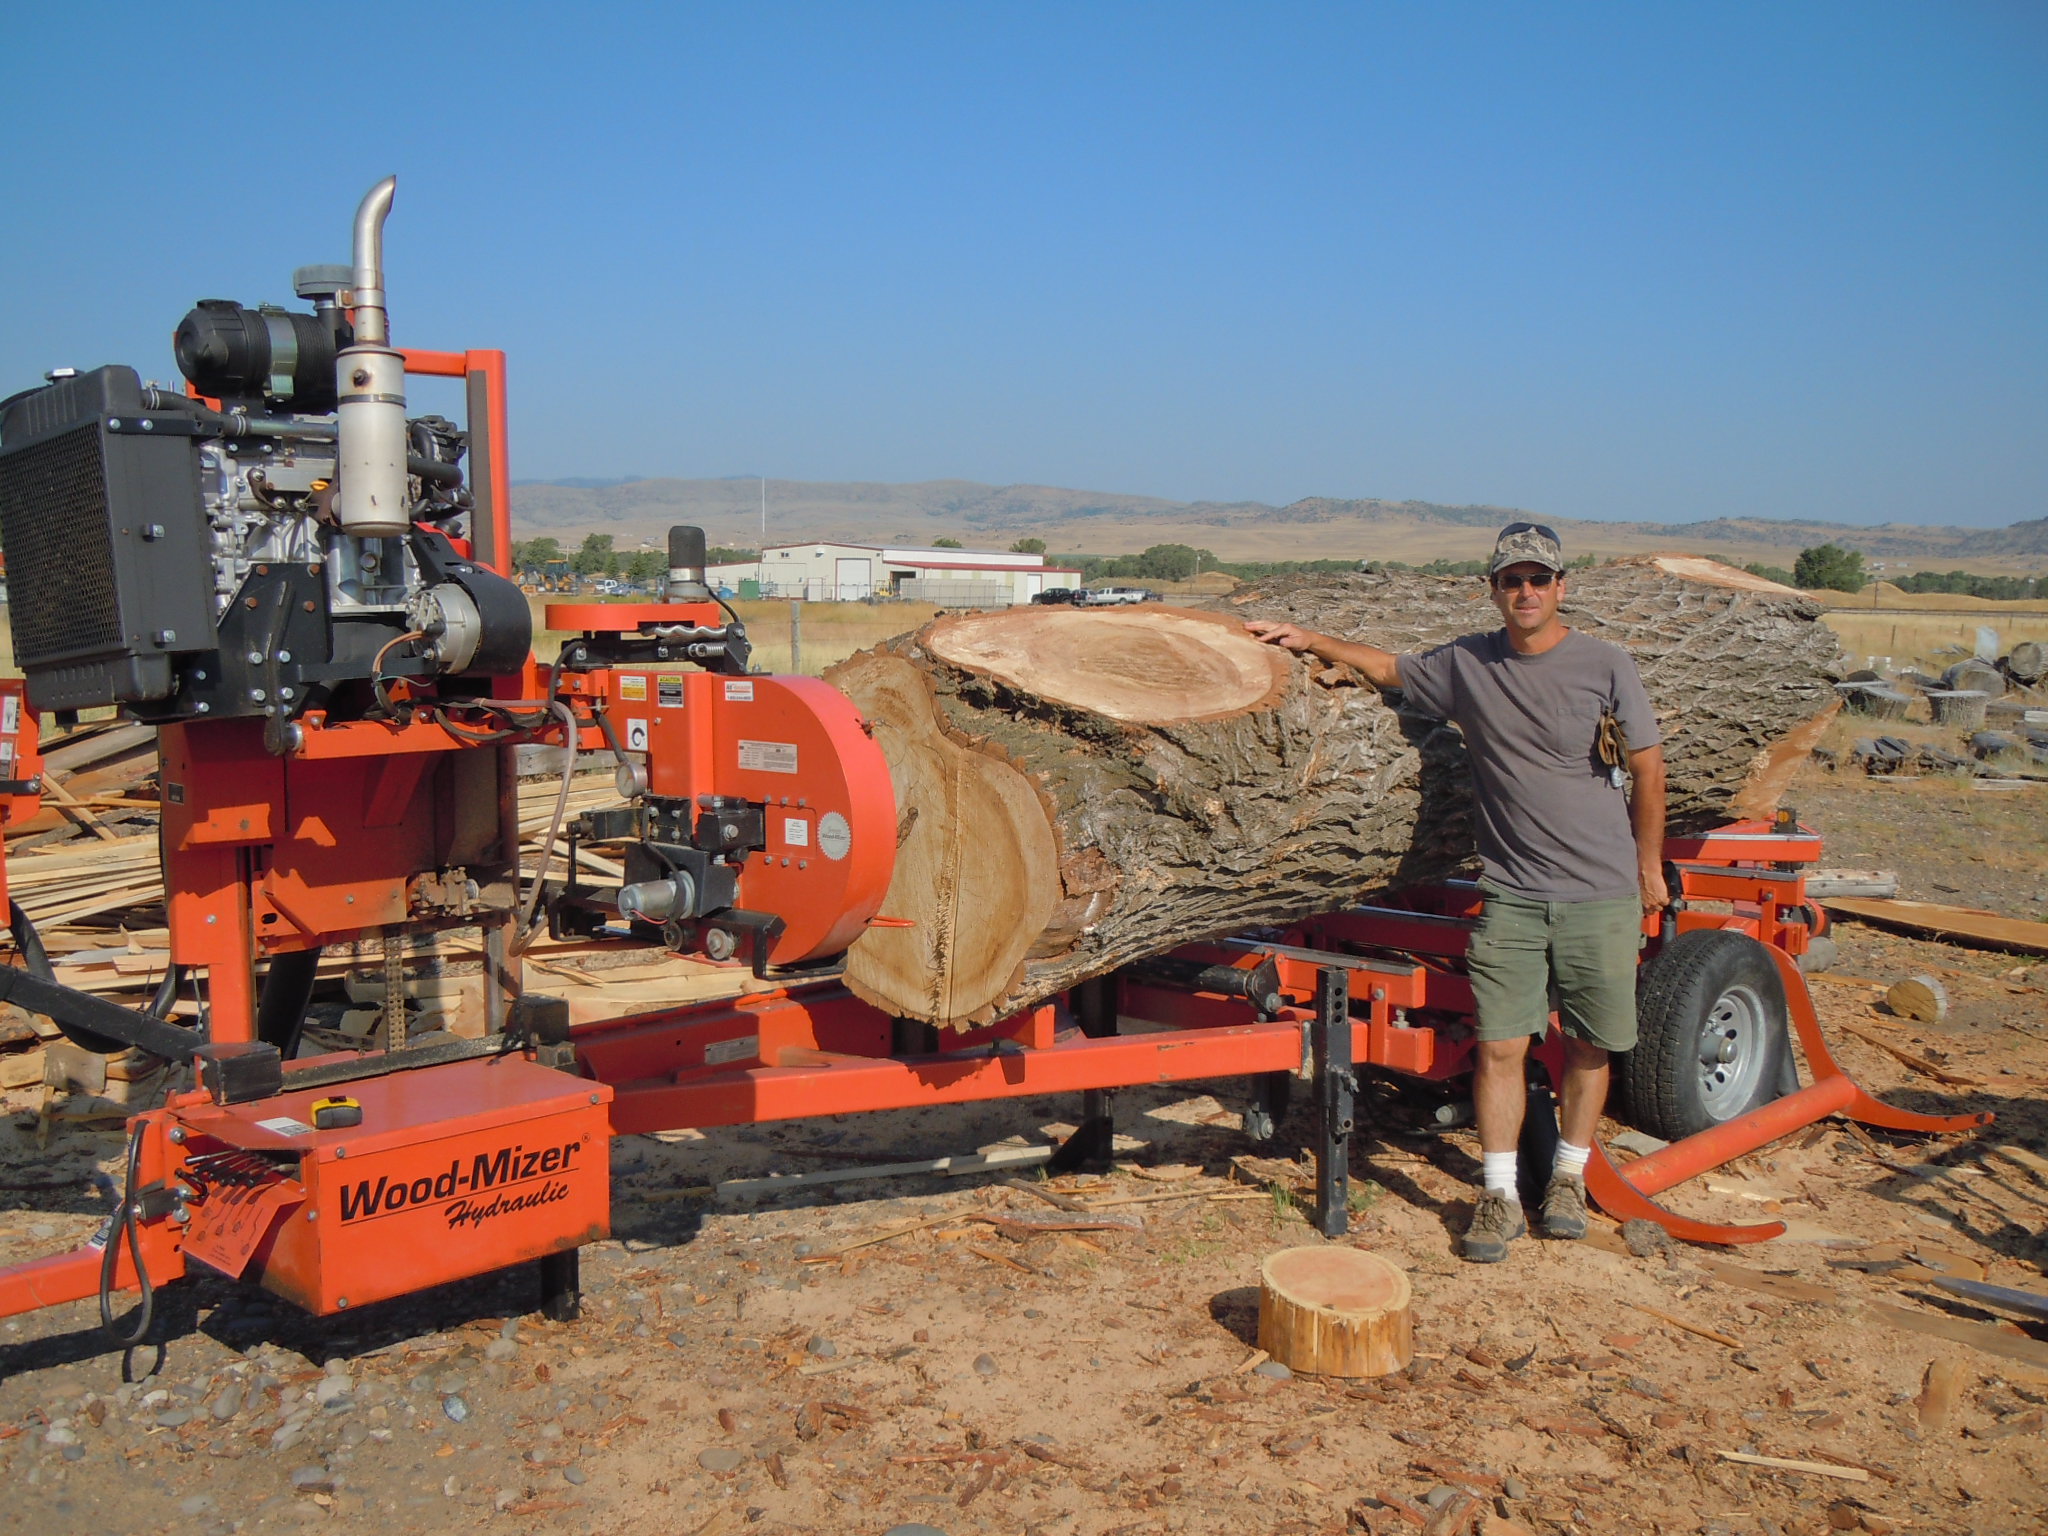 which is the best portable sawmill